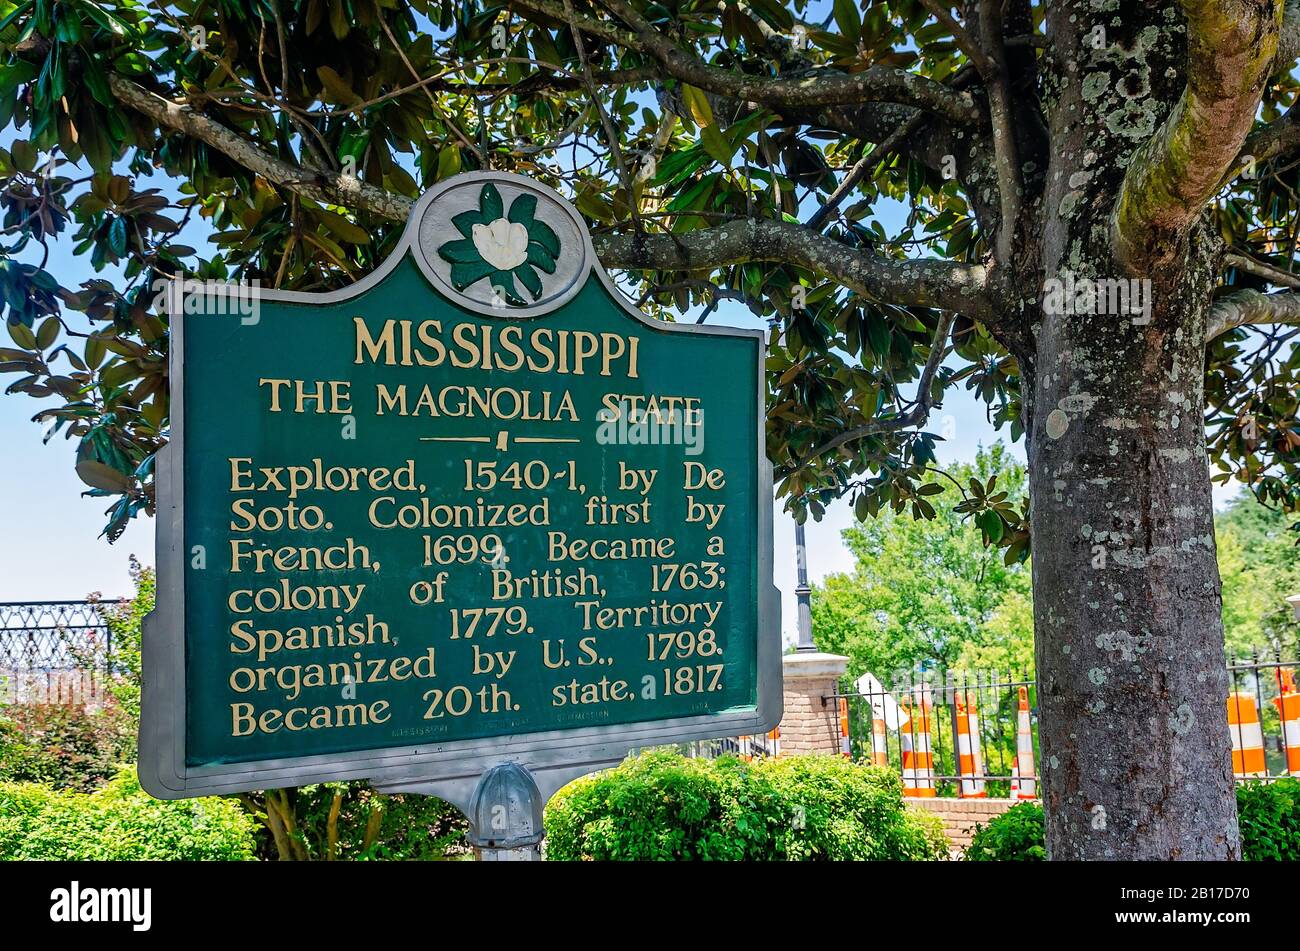 A historic marker beneath a magnolia tree details the history of Mississippi, The Magnolia State, at the Welcome Center in Vicksburg, Mississippi. Stock Photo